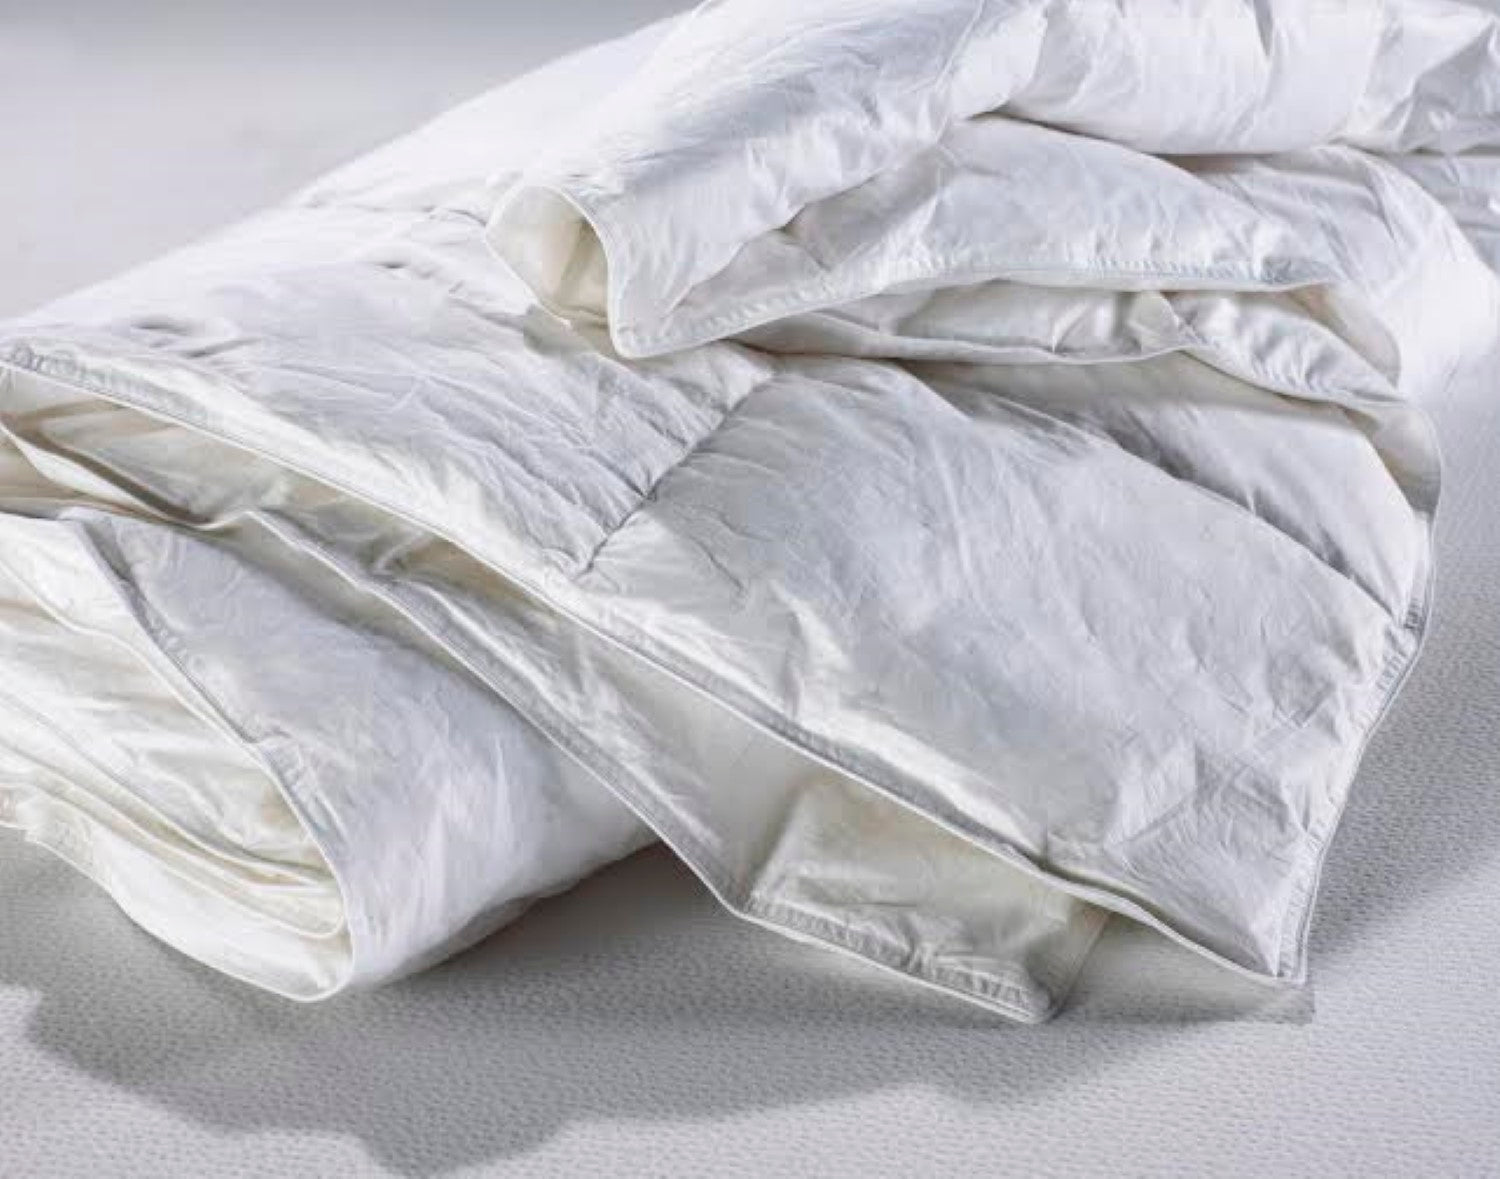 ViscoLogic Comforter Duvet Insert White - Quilted Comforter with Corner Tabs - Feather and White Duck Down Mix Fill, Box Stitched